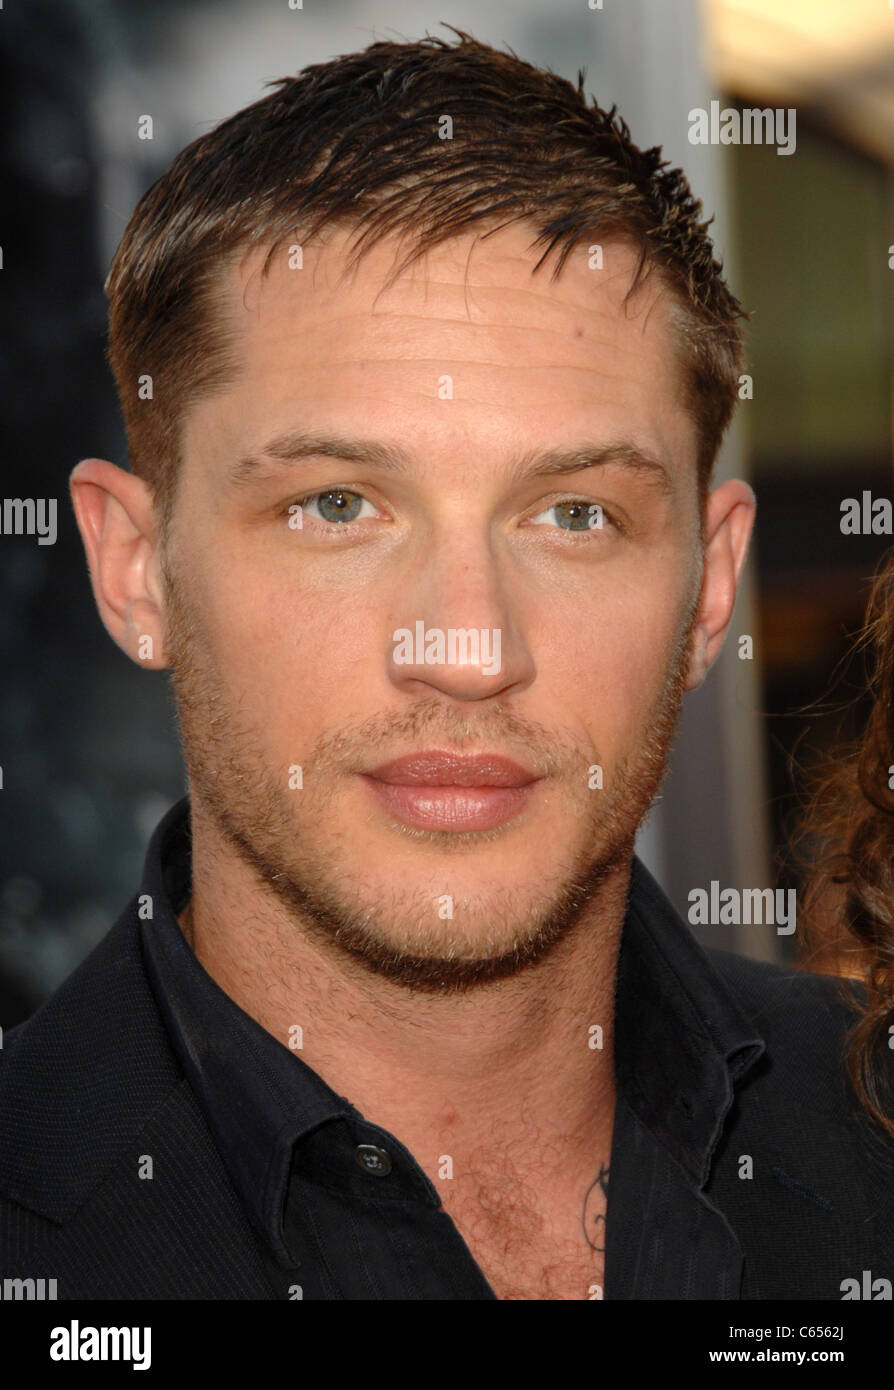 Tom Hardy at arrivals for INCEPTION Premiere, Grauman's Chinese Theatre, Los Angeles, CA July 13, 2010. Photo By: Dee Cercone/Everett Collection Stock Photo